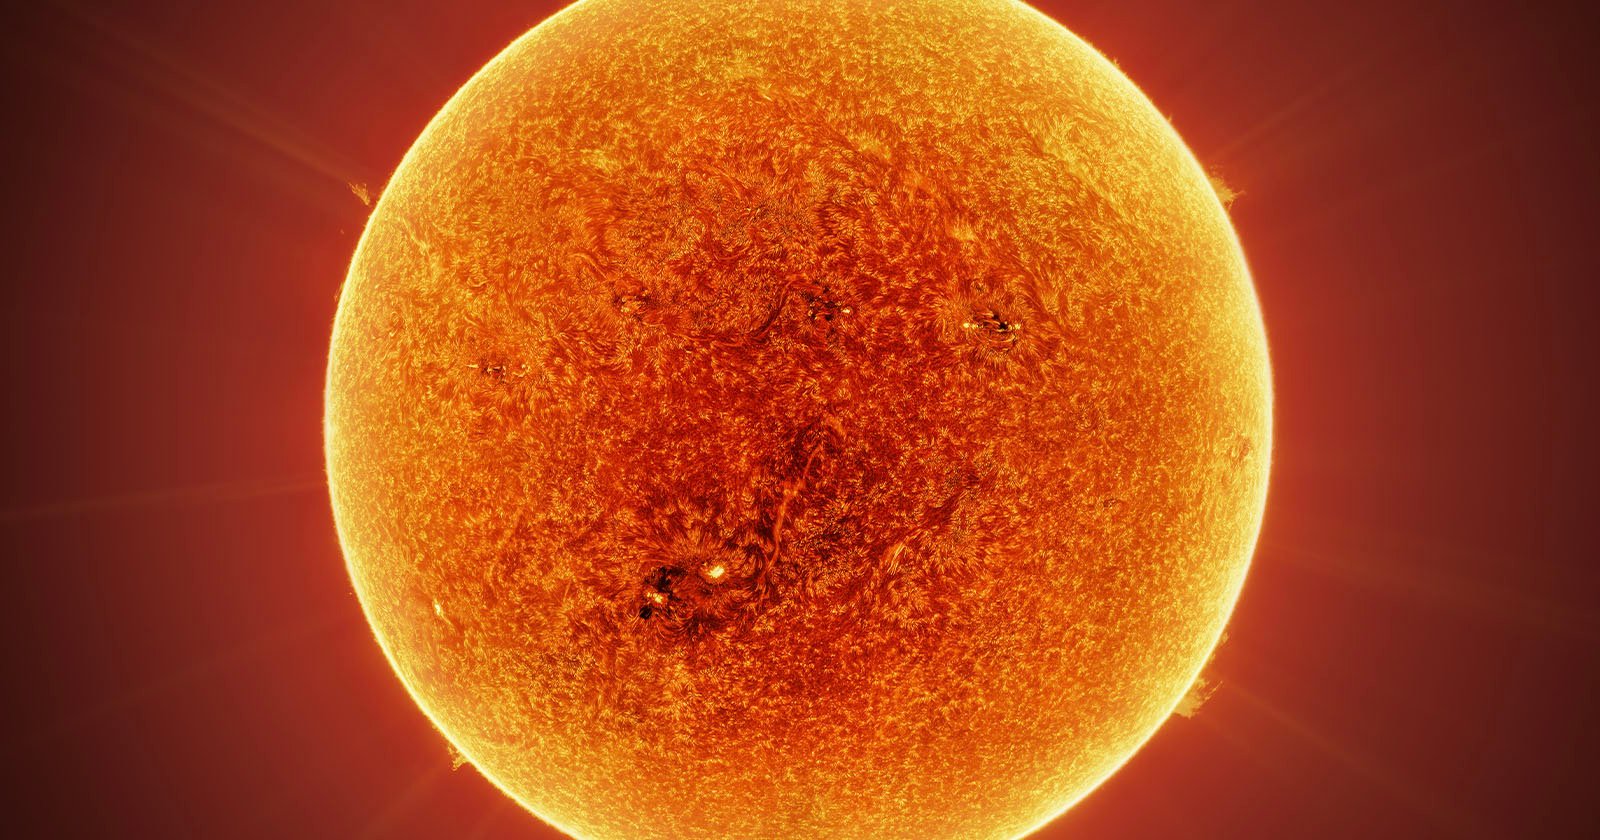 A photo of the sun taken by a 400-megapixel photographer consists of 100,000 images